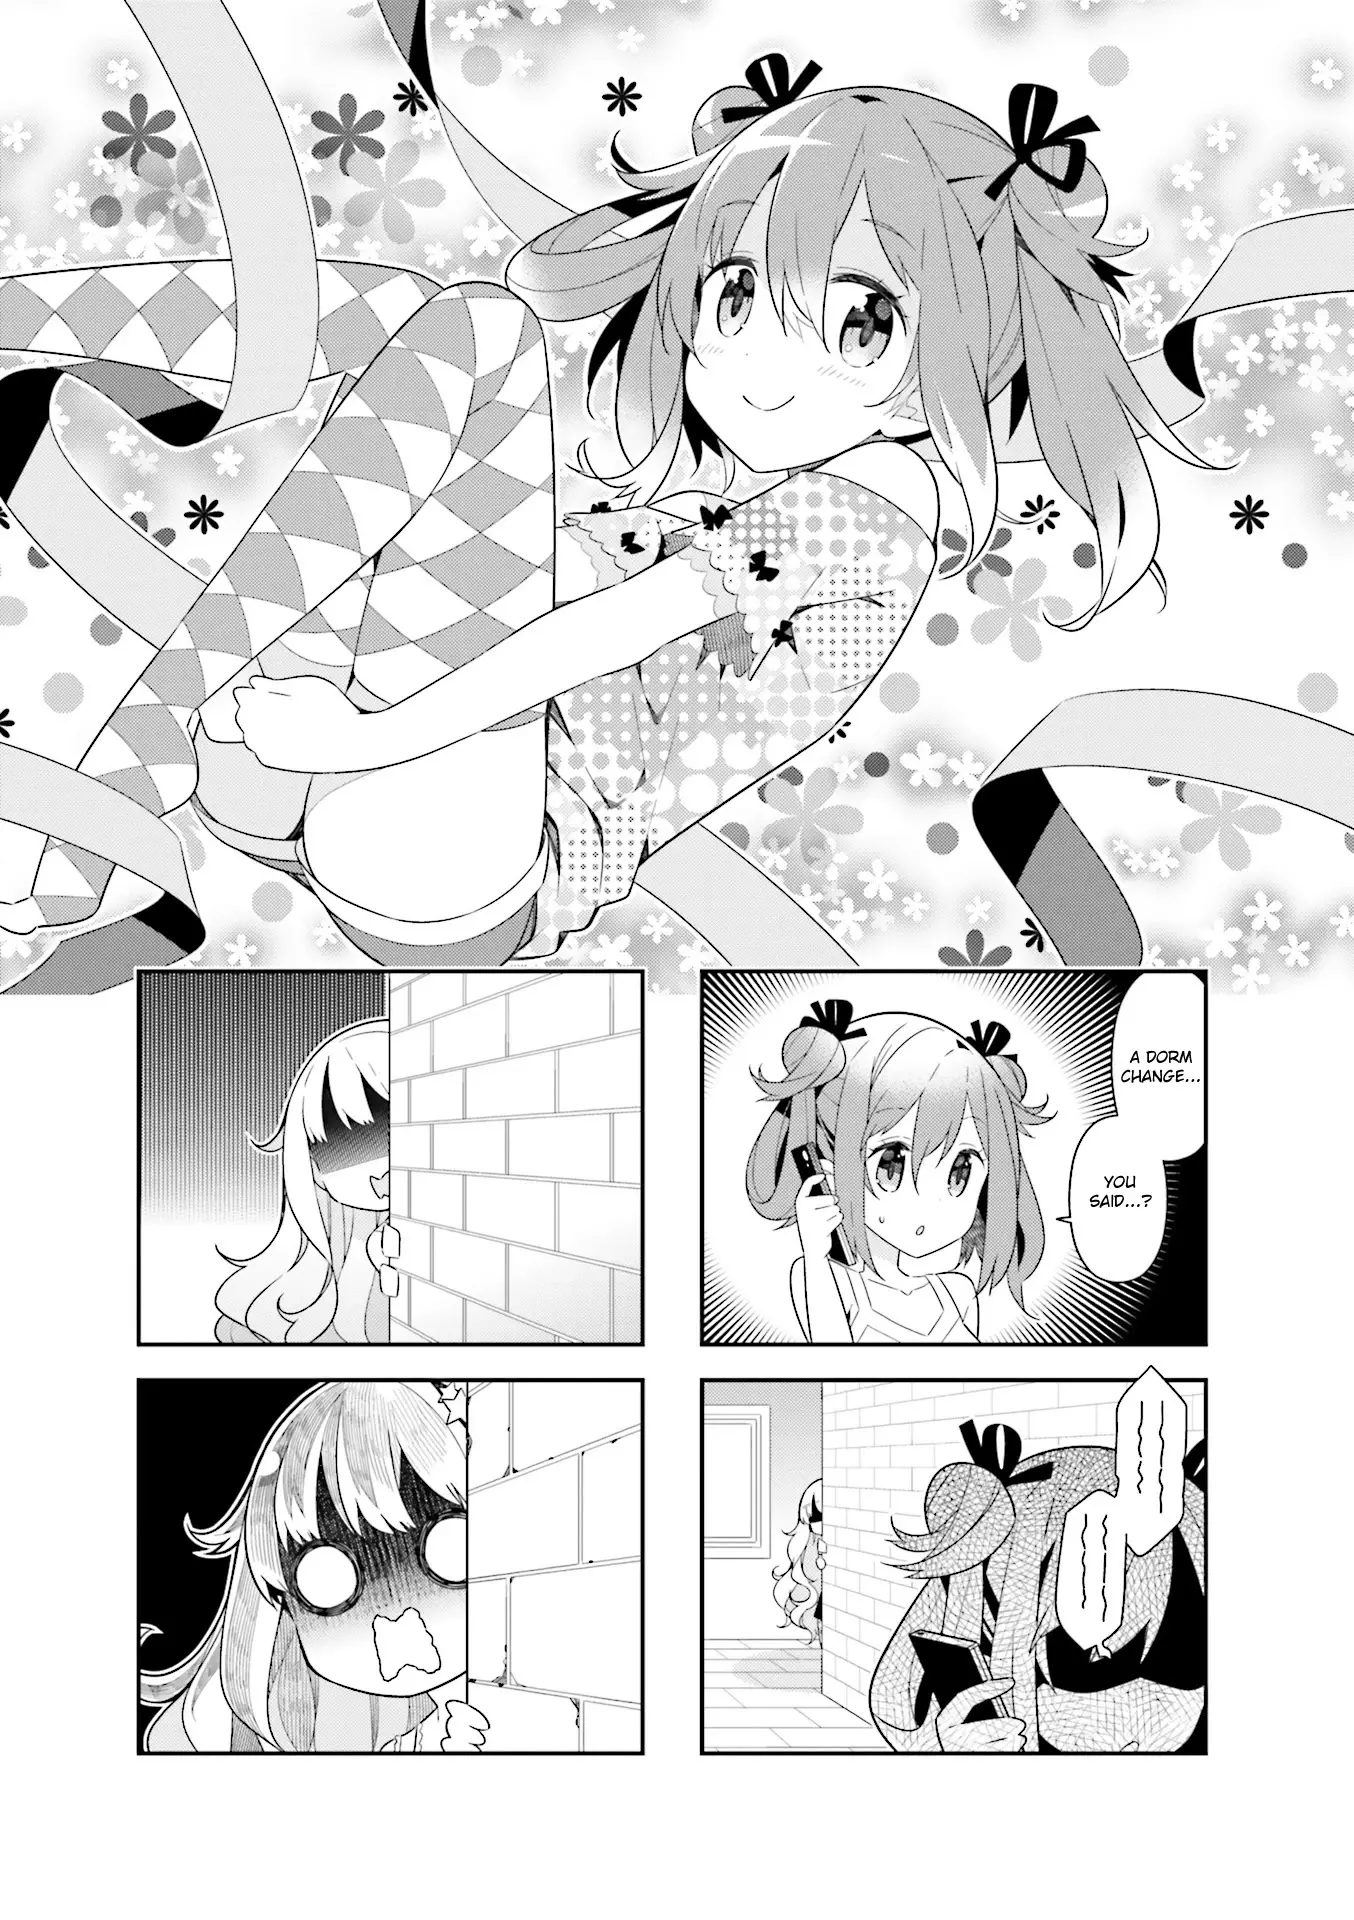 The Life After Retirement Of Magical Girls - 12 page 1-6b7ab5e0